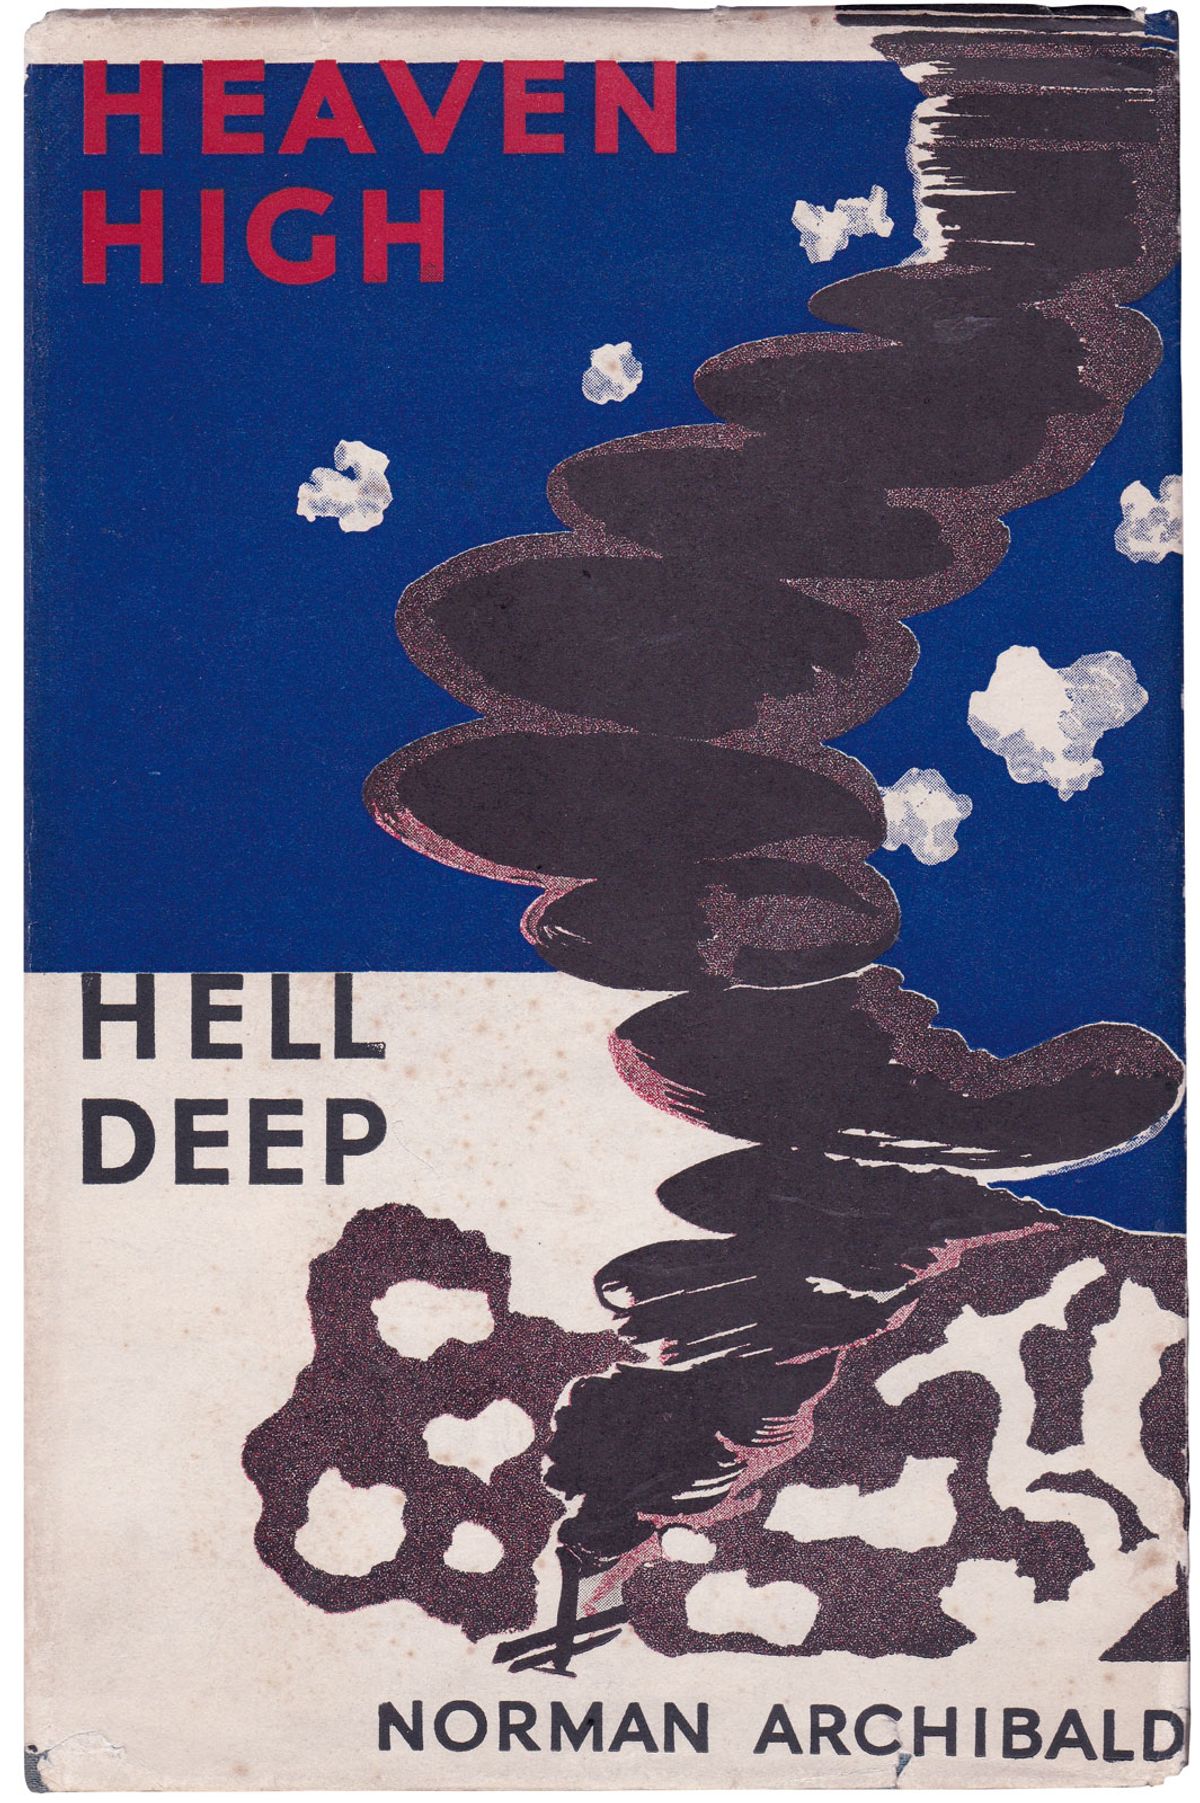 Paul Nash's design for Heaven High, Hell Deep (1935) by Norman Archibald